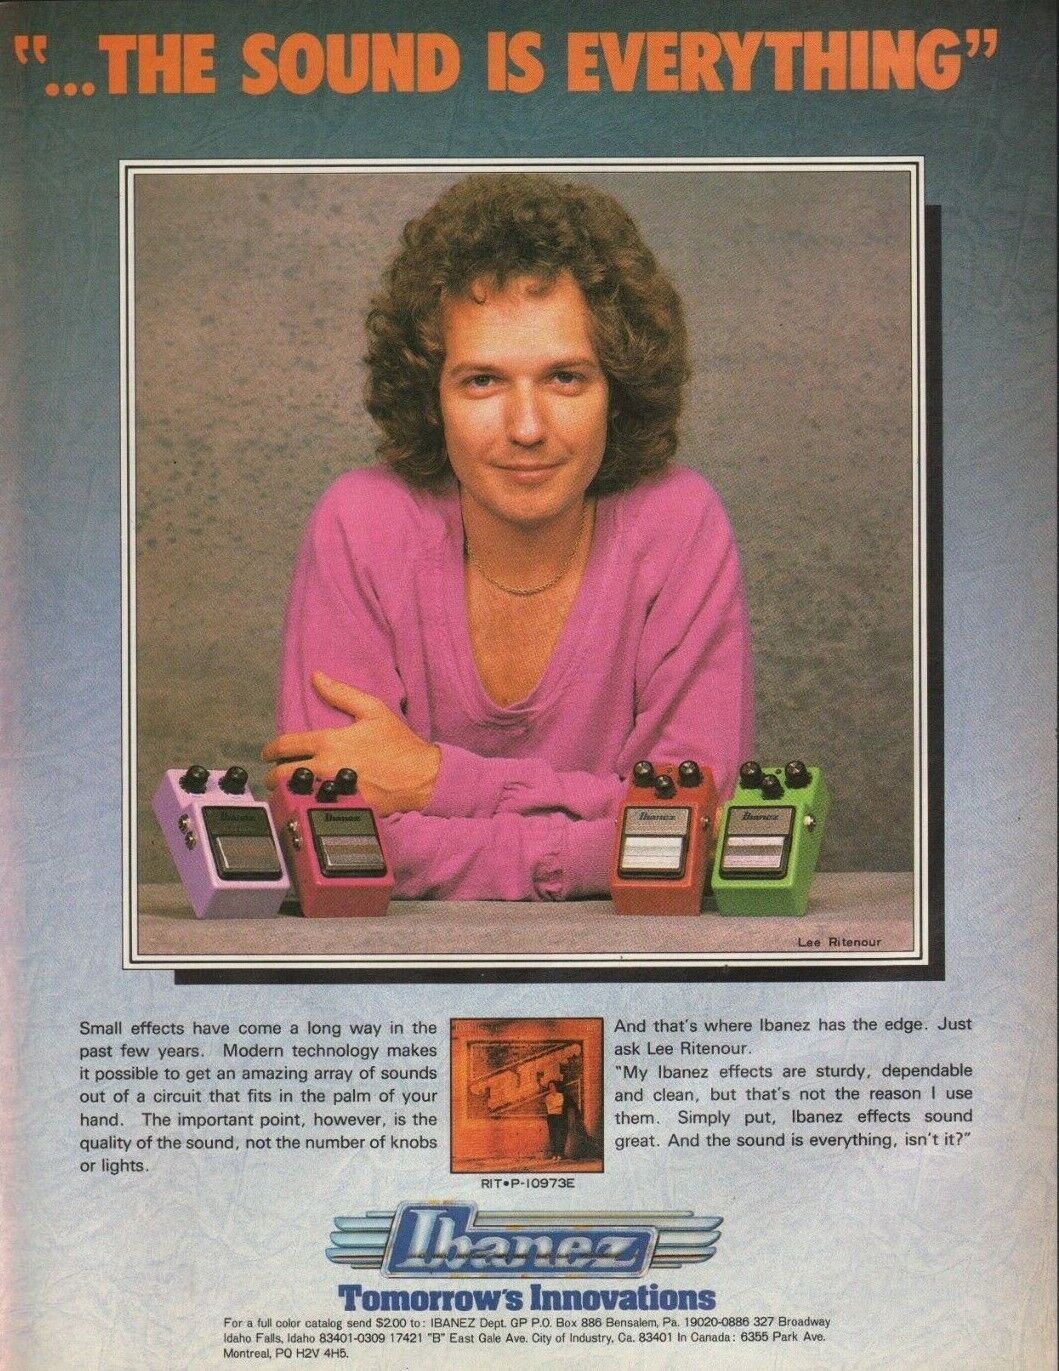 1982 Lee Ritenour for Ibanez Guitar Effects Pedals - Vintage Ad